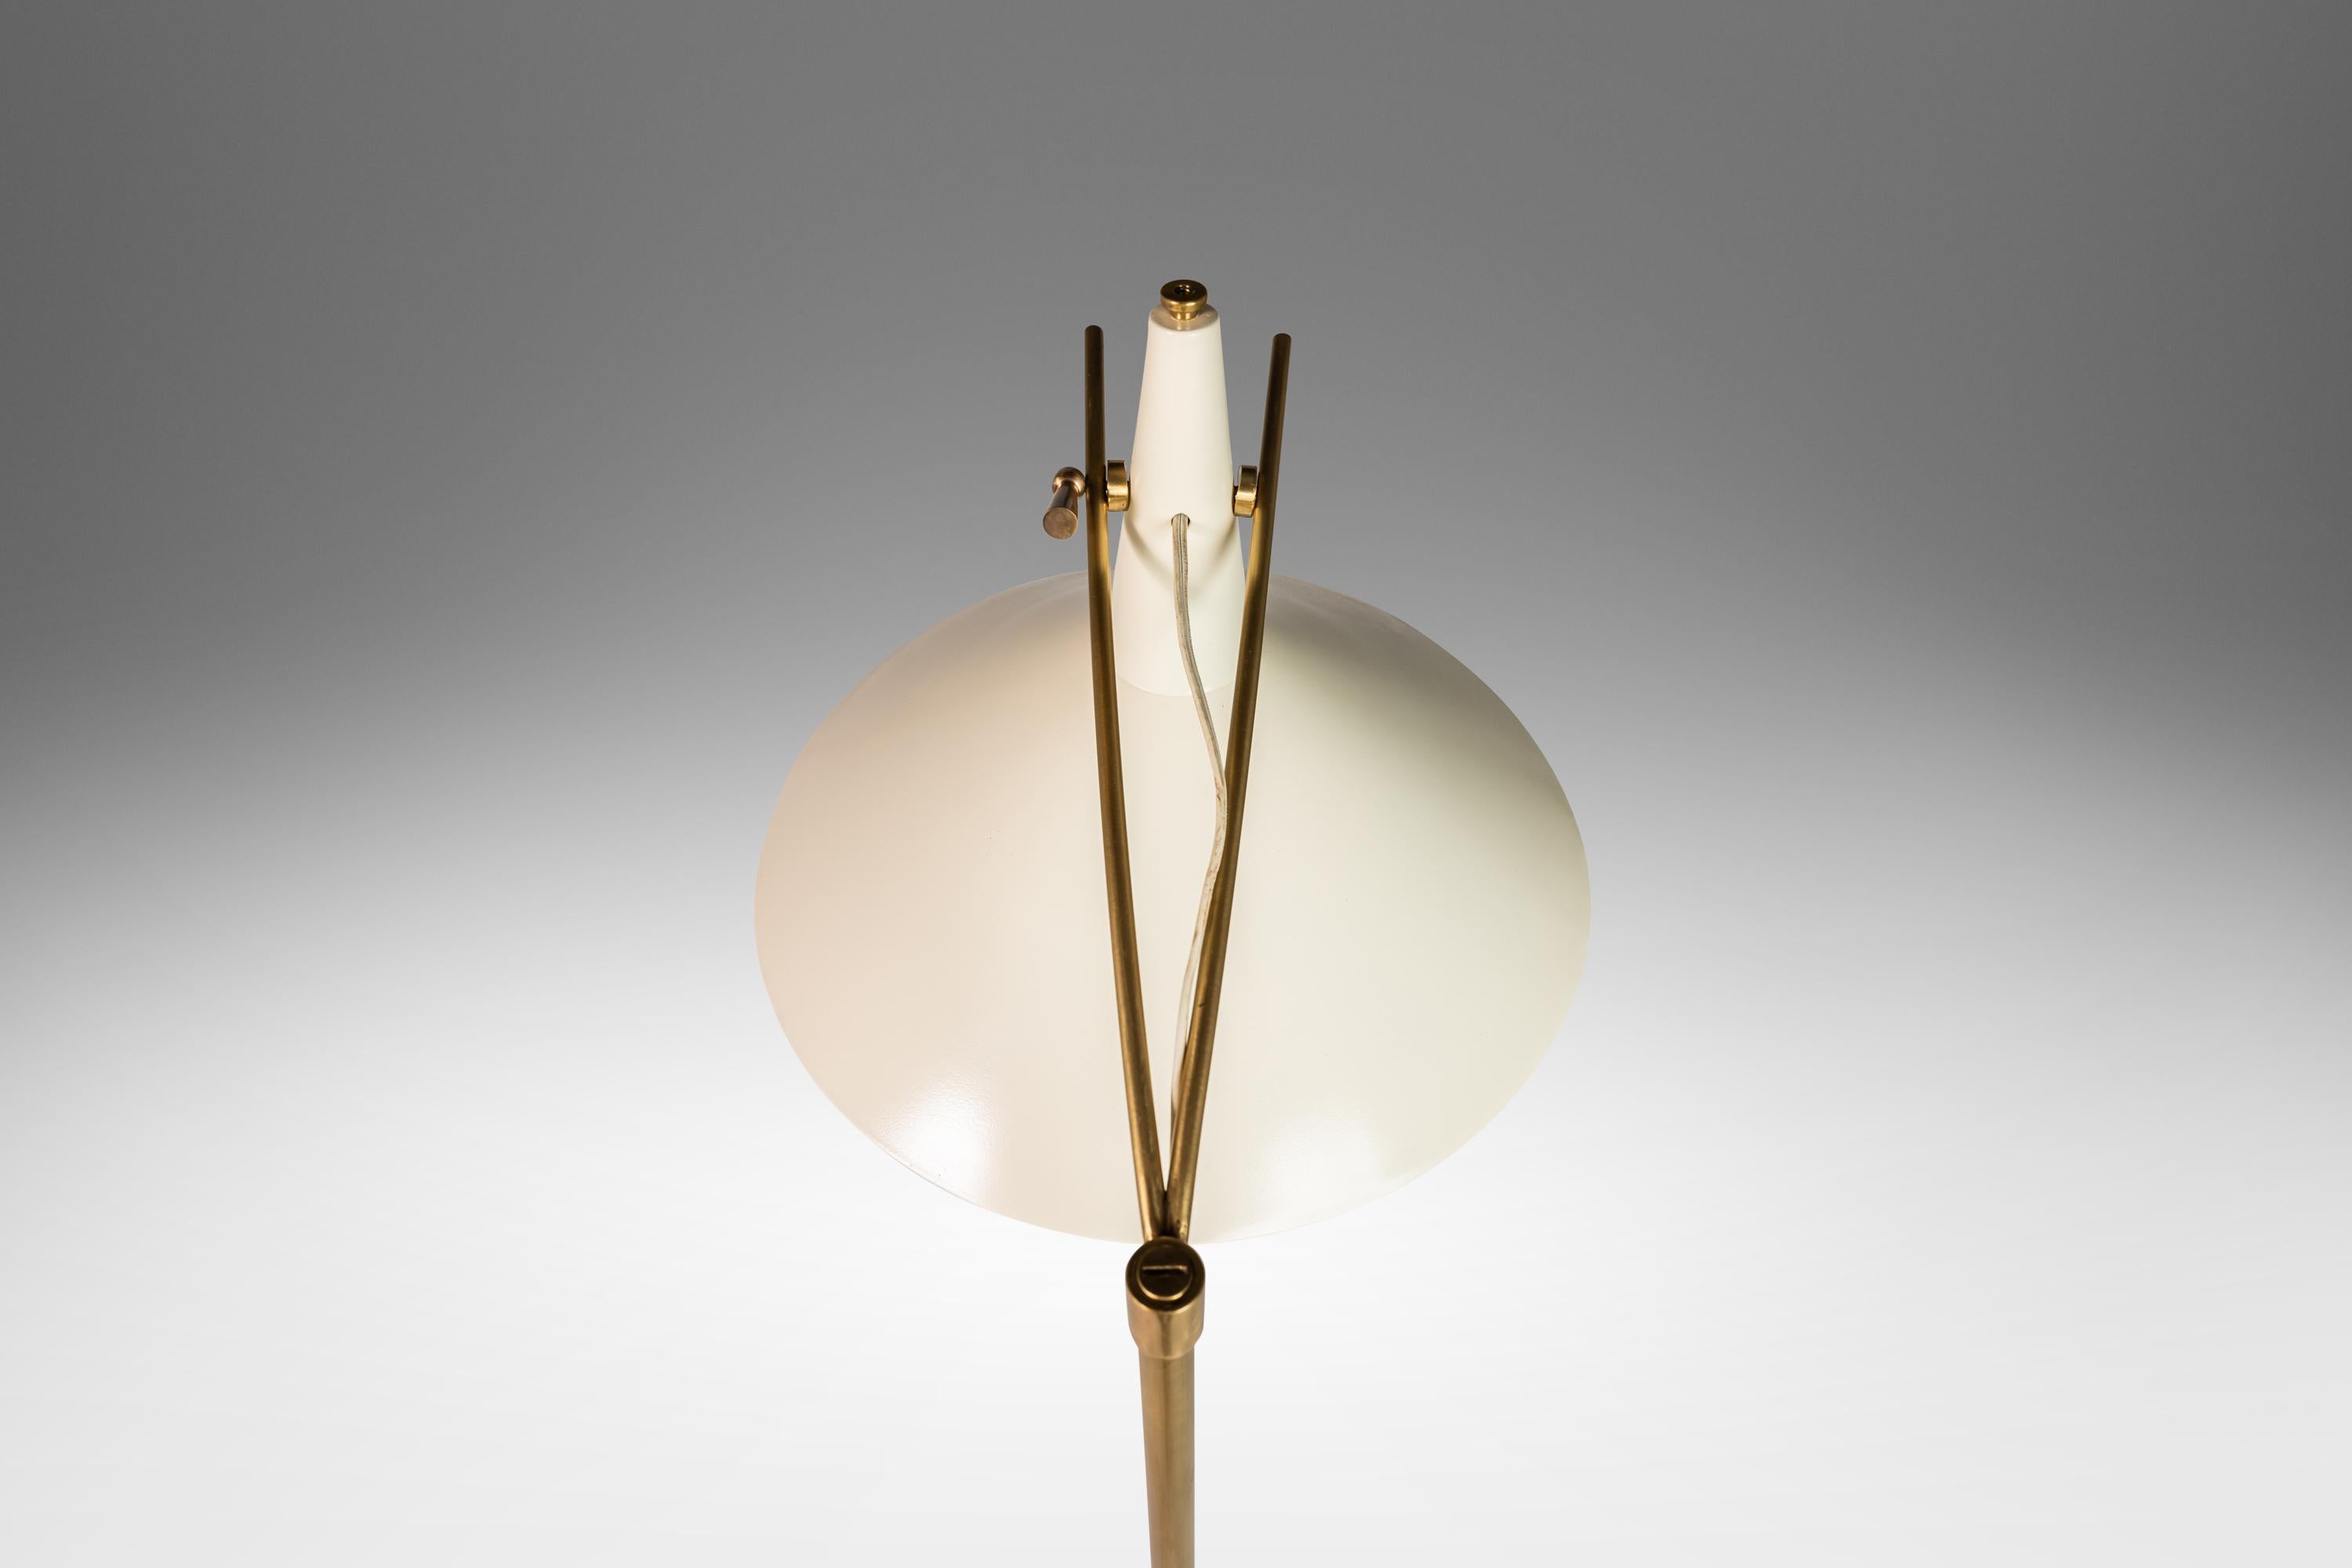 Mid-Century Model E-11 Floor Lamp by Paul McCobb for Directional, USA, c. 1950's For Sale 6